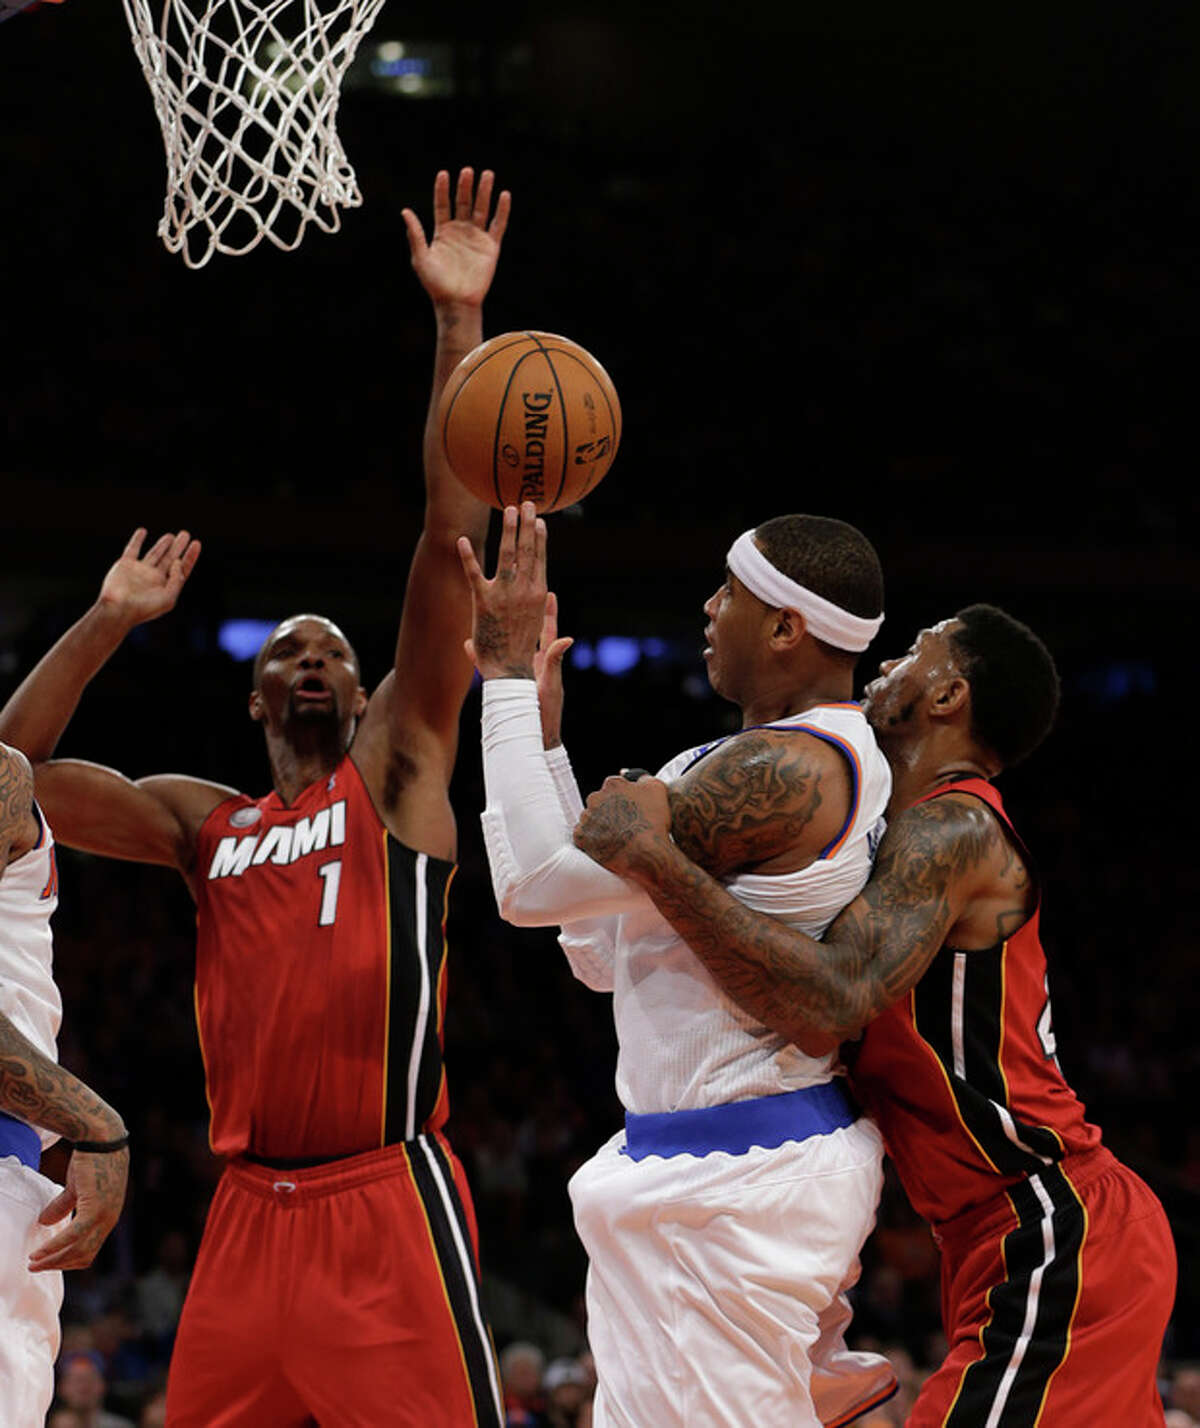 Miami Heat forward Udonis Haslem, right, holds New York Knicks forward Carmelo Anthony, center, as Heat center Chris Bosh (1) tries to block Anthony's shot during the first half of their an basketball game at Madison Square Garden in New York, Sunday, March 3, 2013. A foul was called on Haslem. (AP Photo/Kathy Willens)